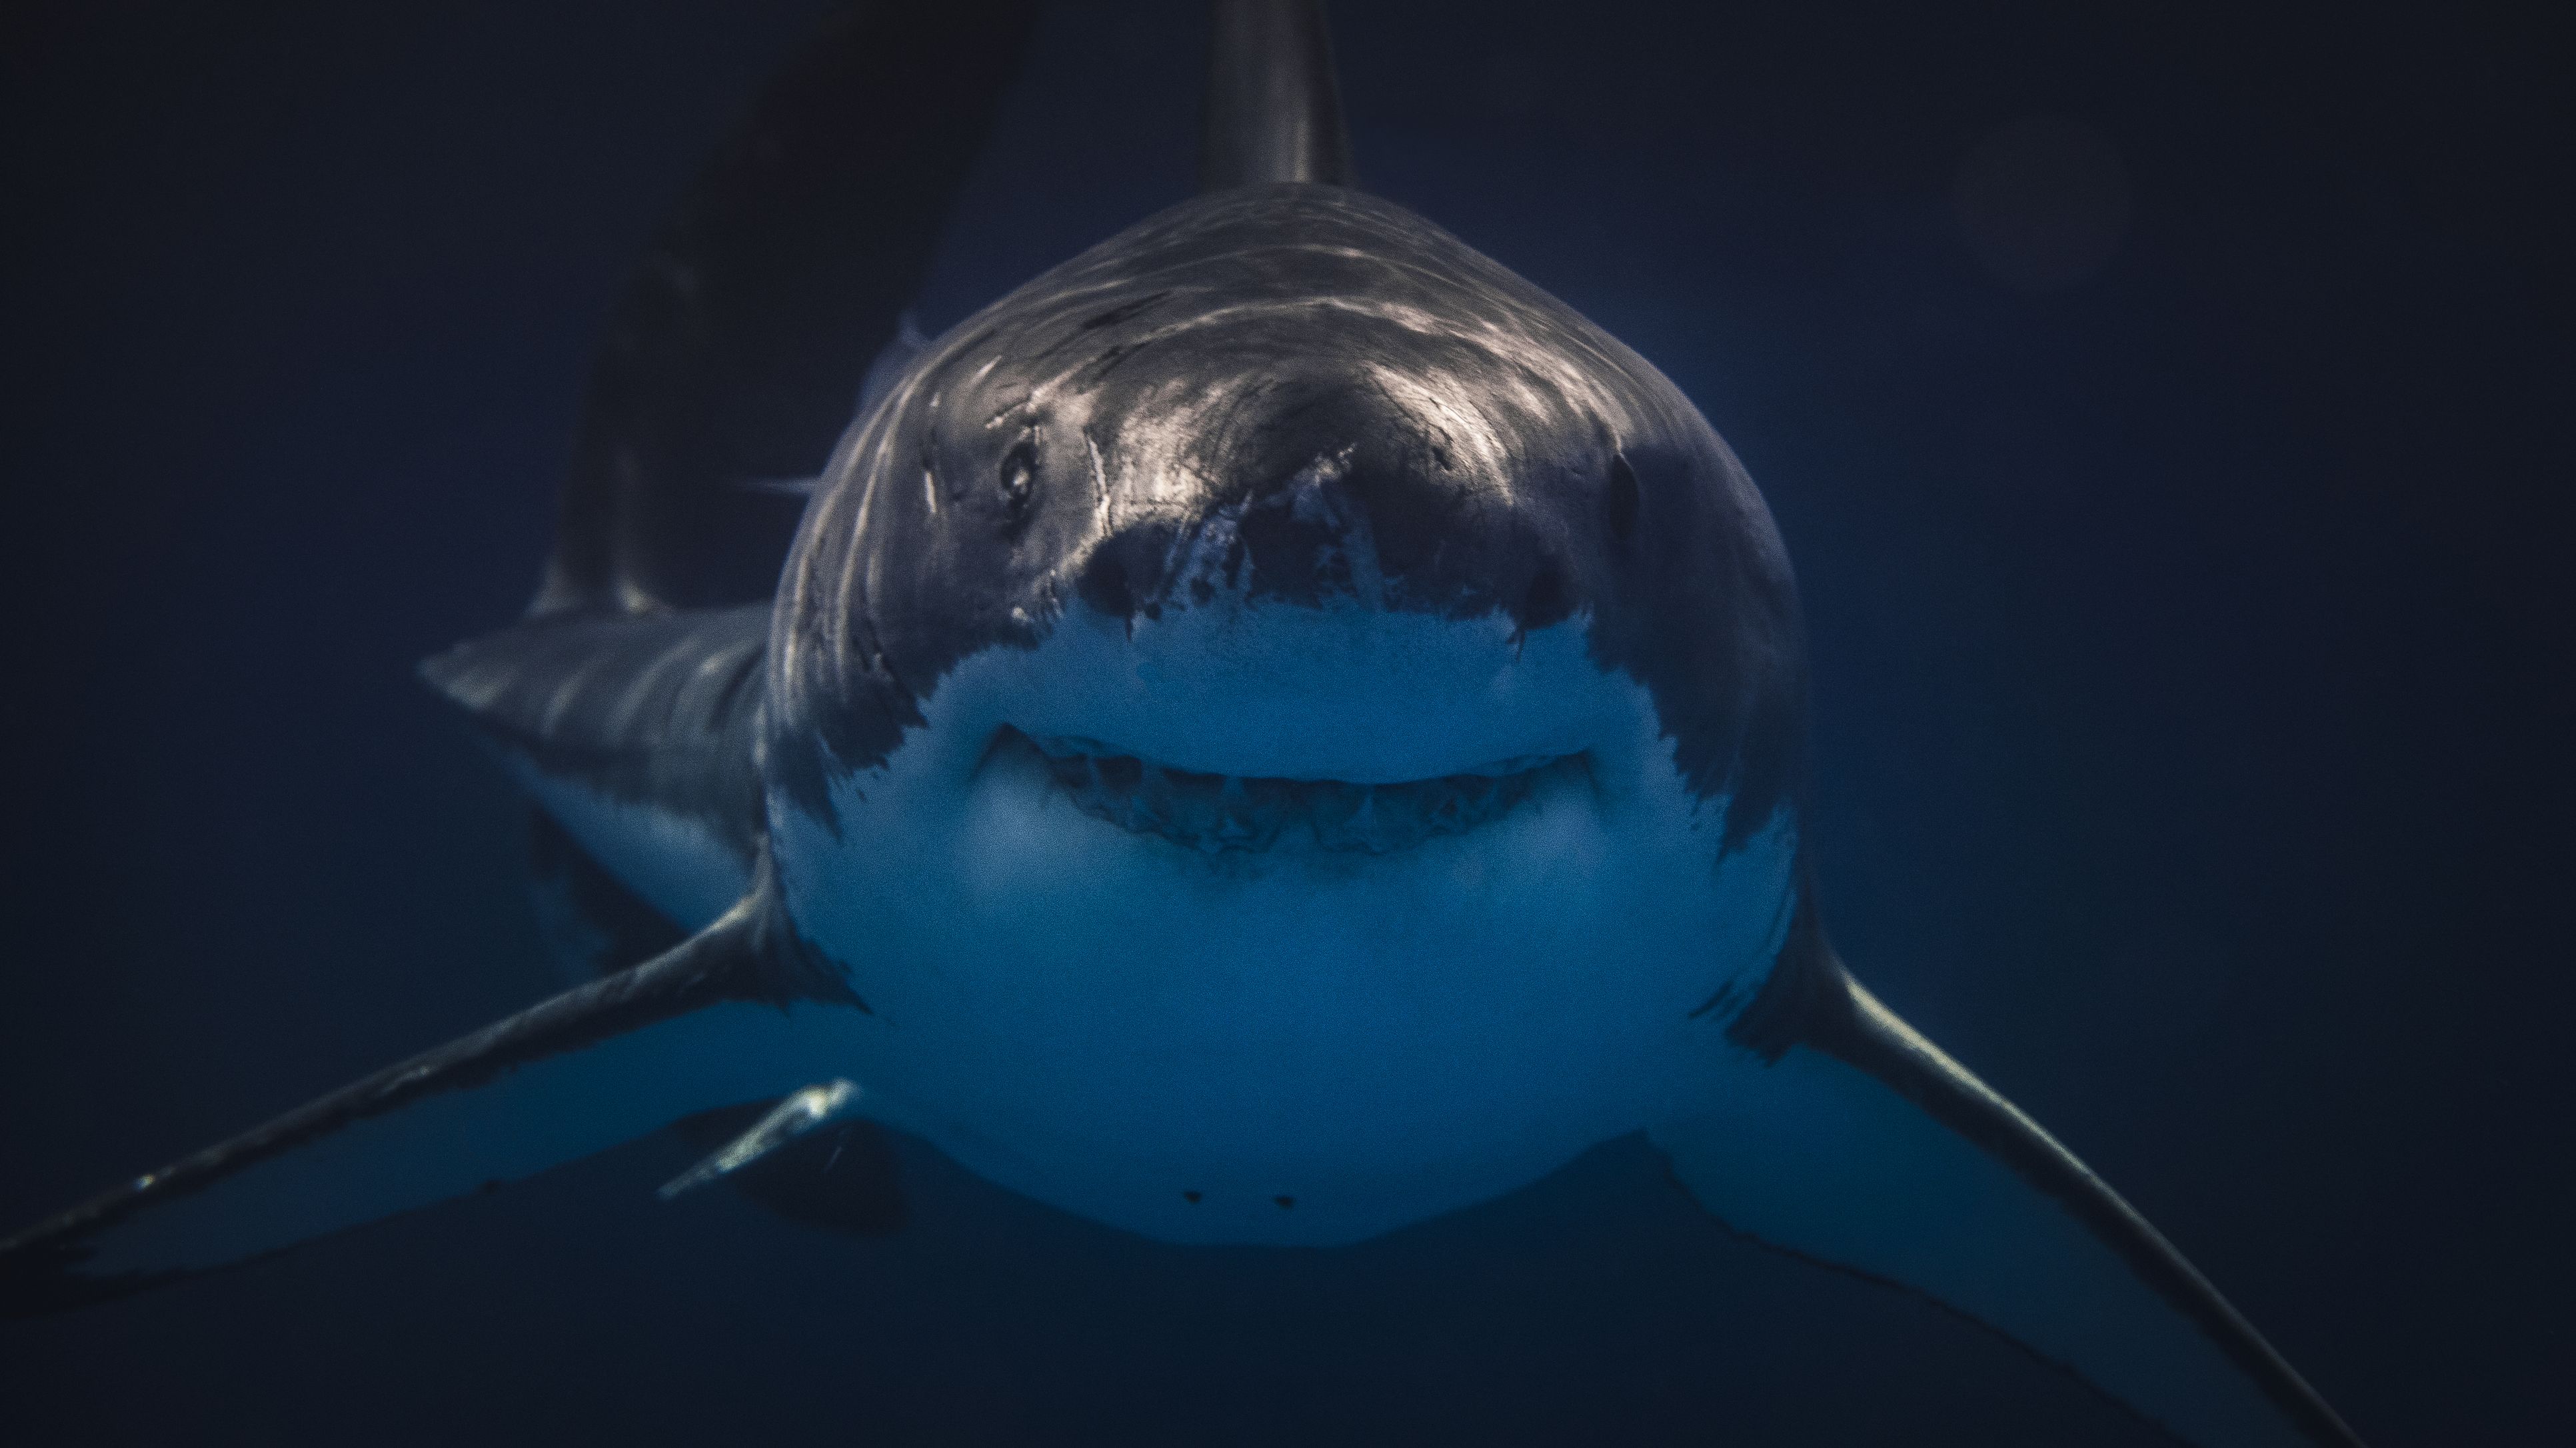 fish feed and grow killing the great white shark